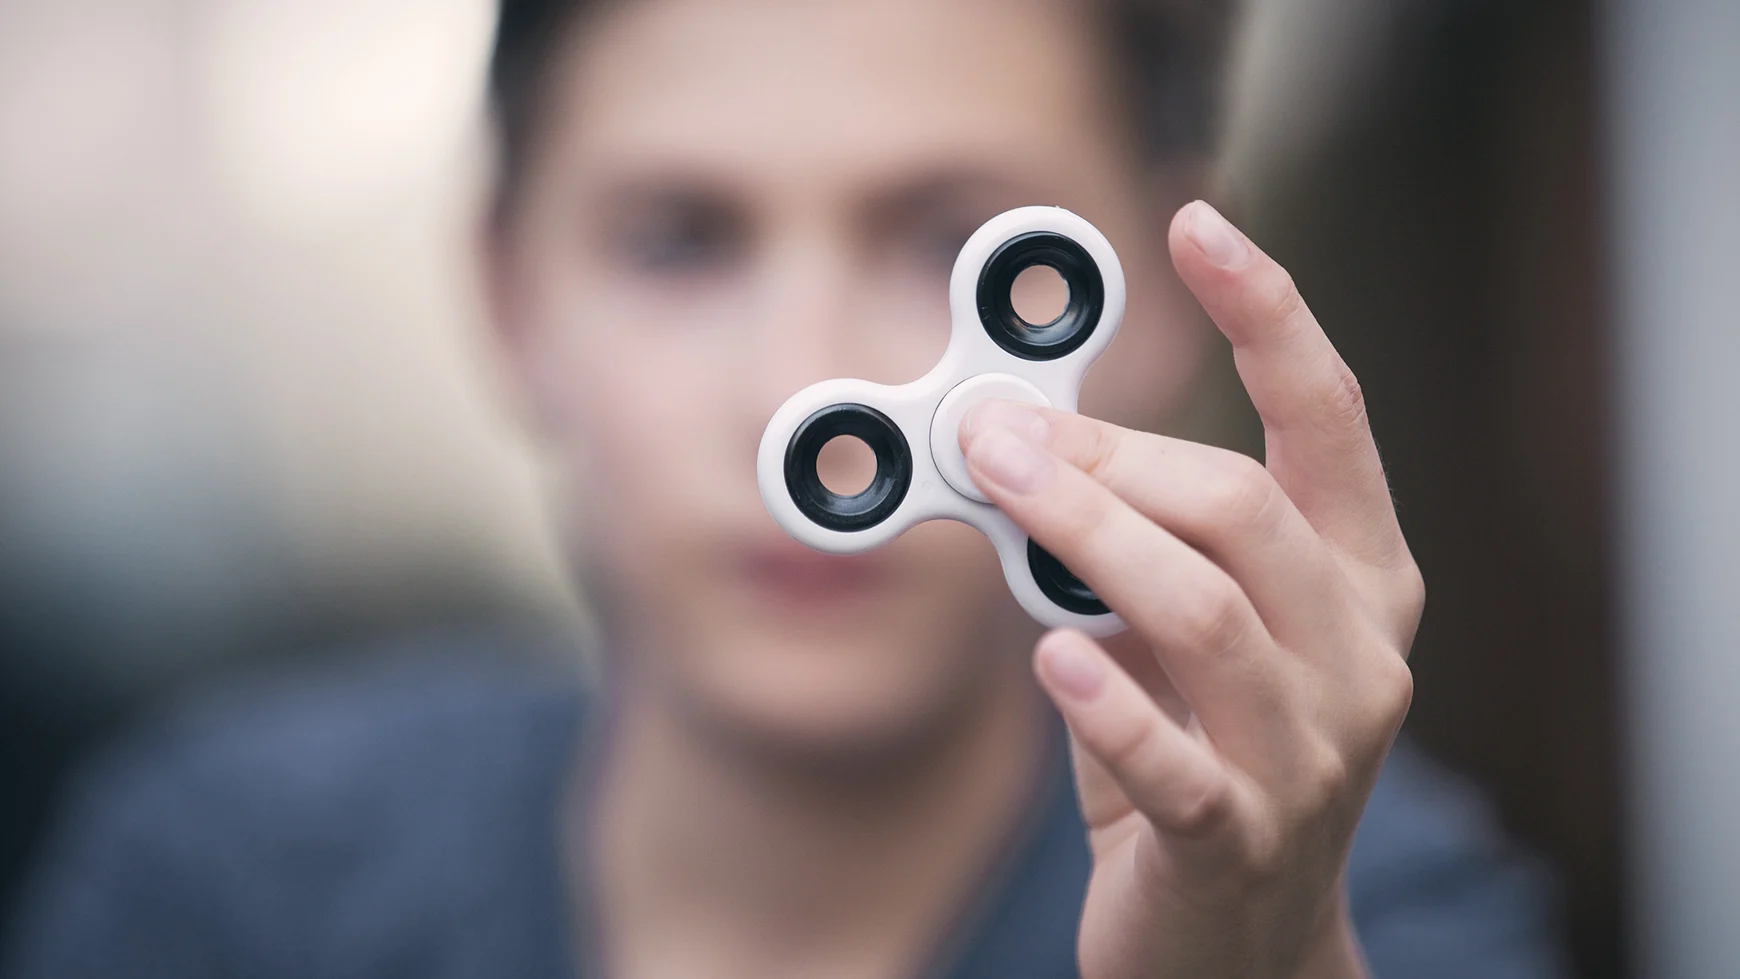 6 types of fun fidgets for kids with ADHD